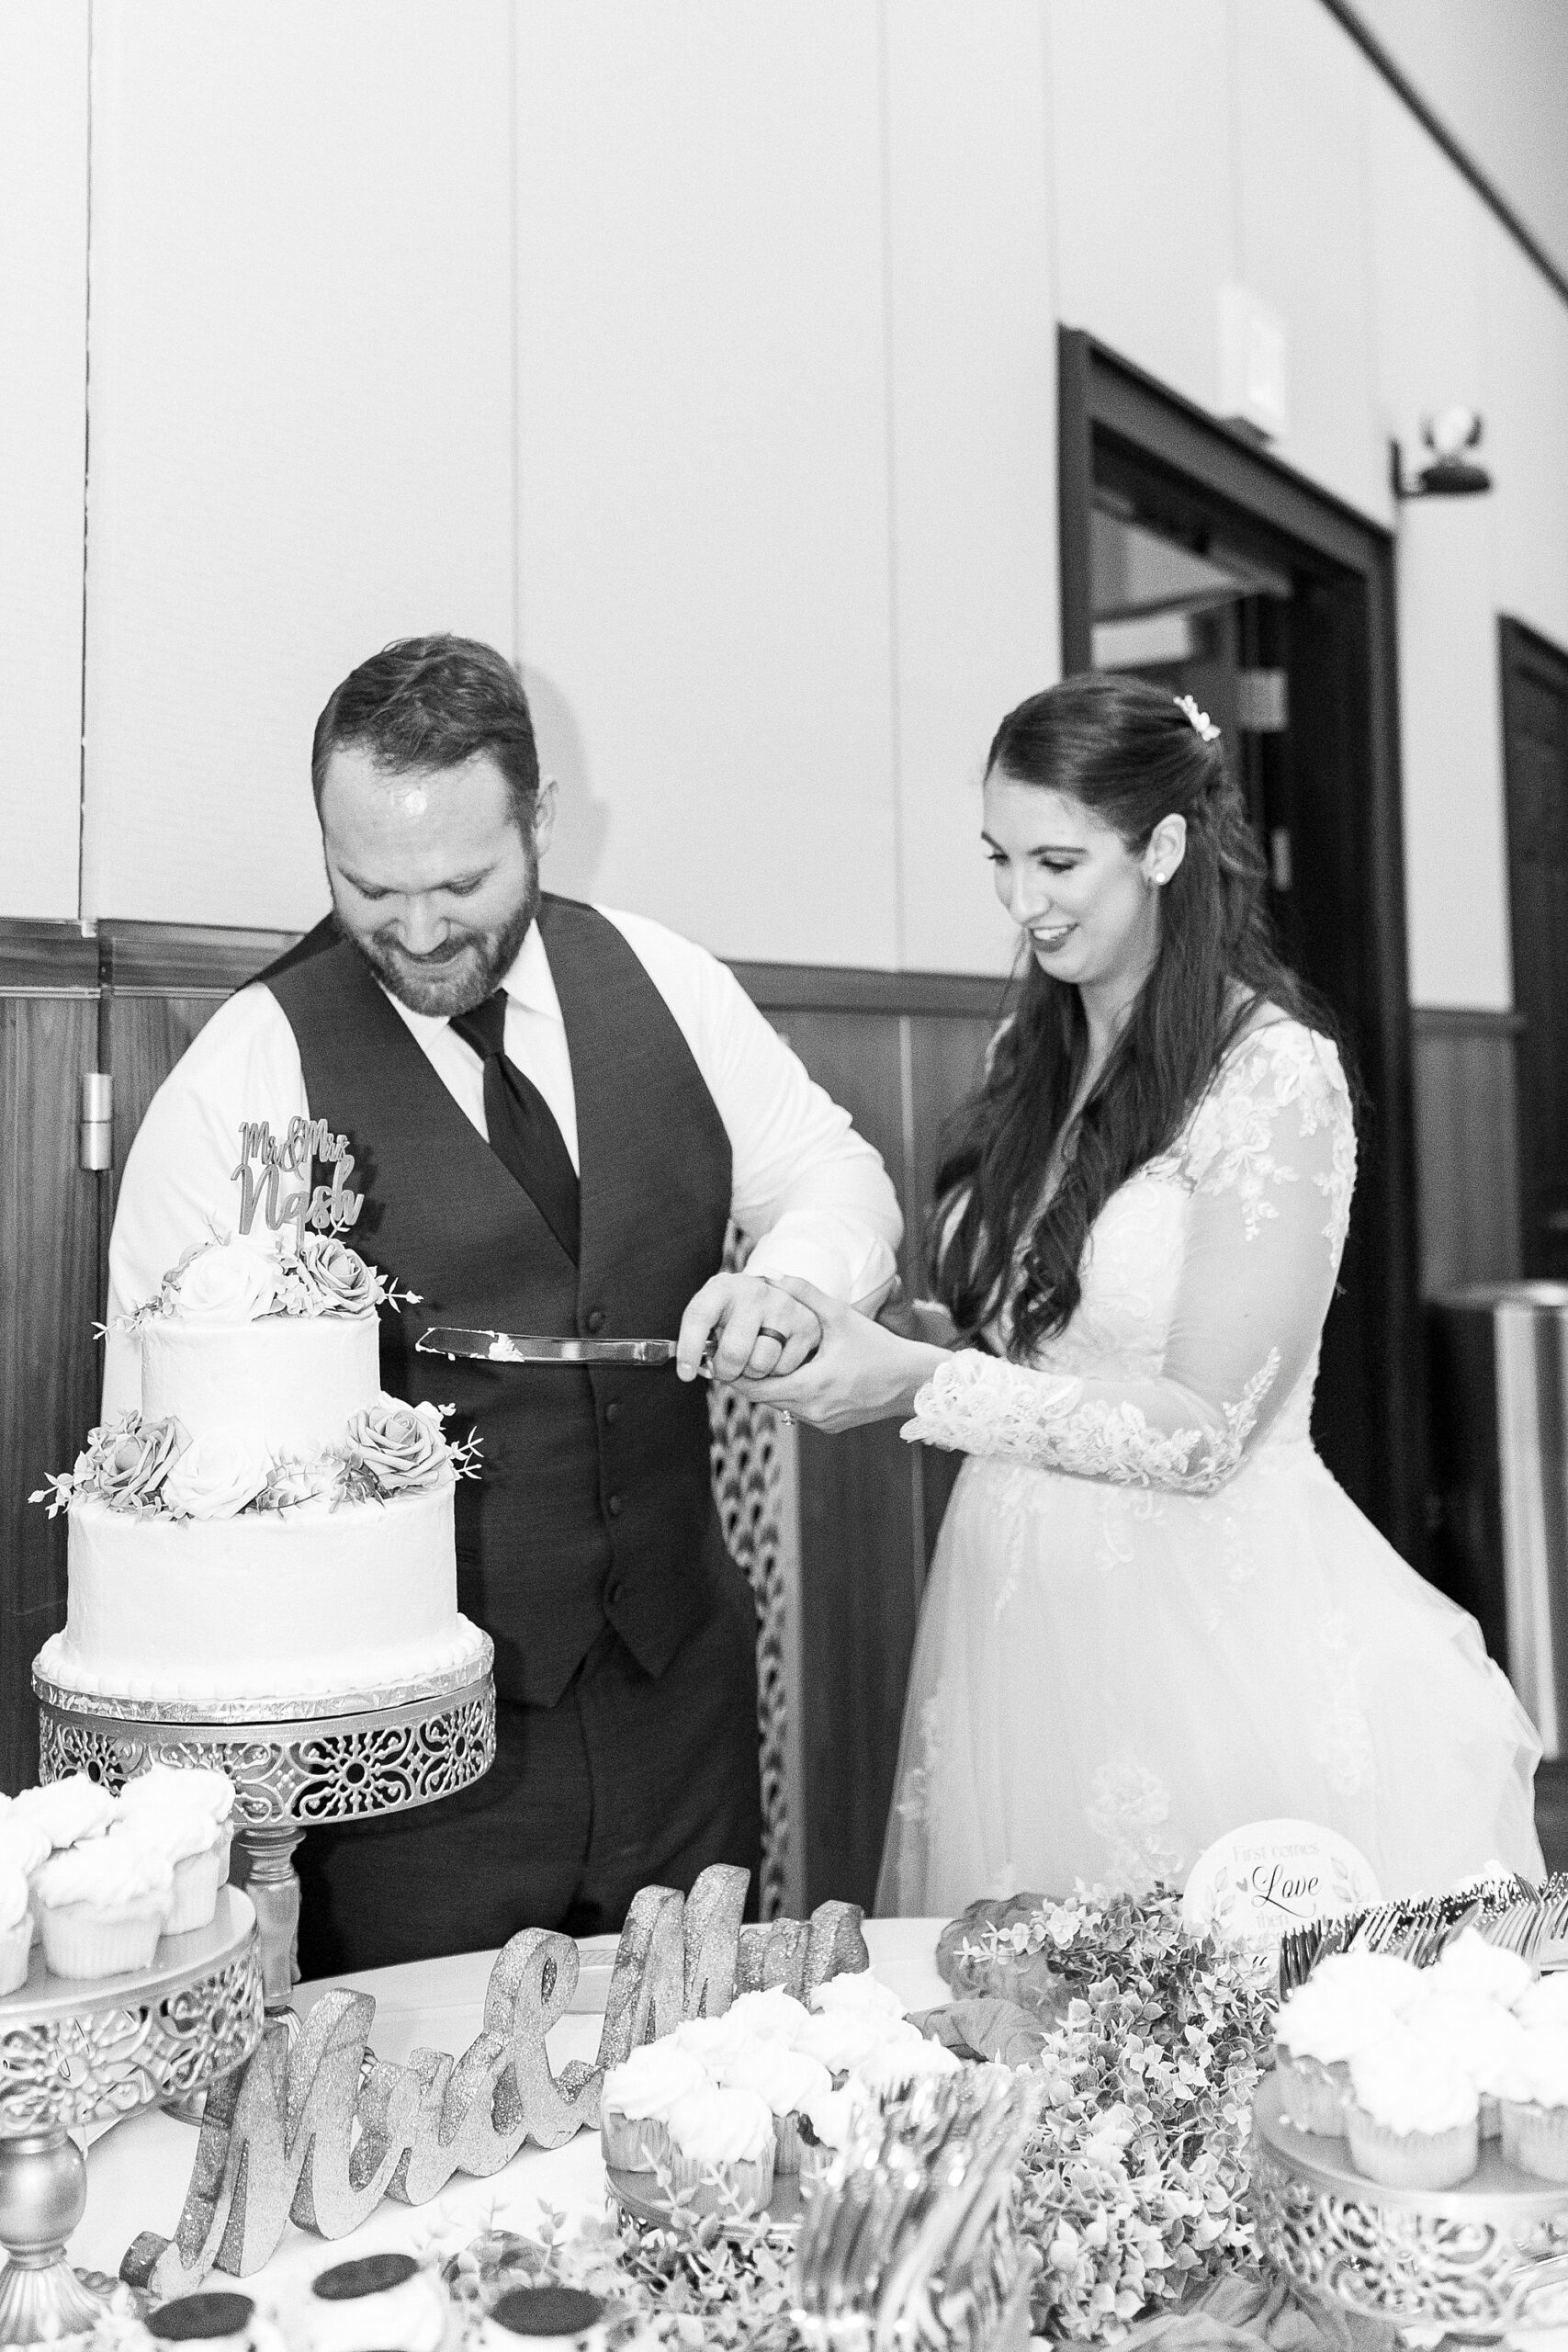 bride and groom cut wedding cake during reception